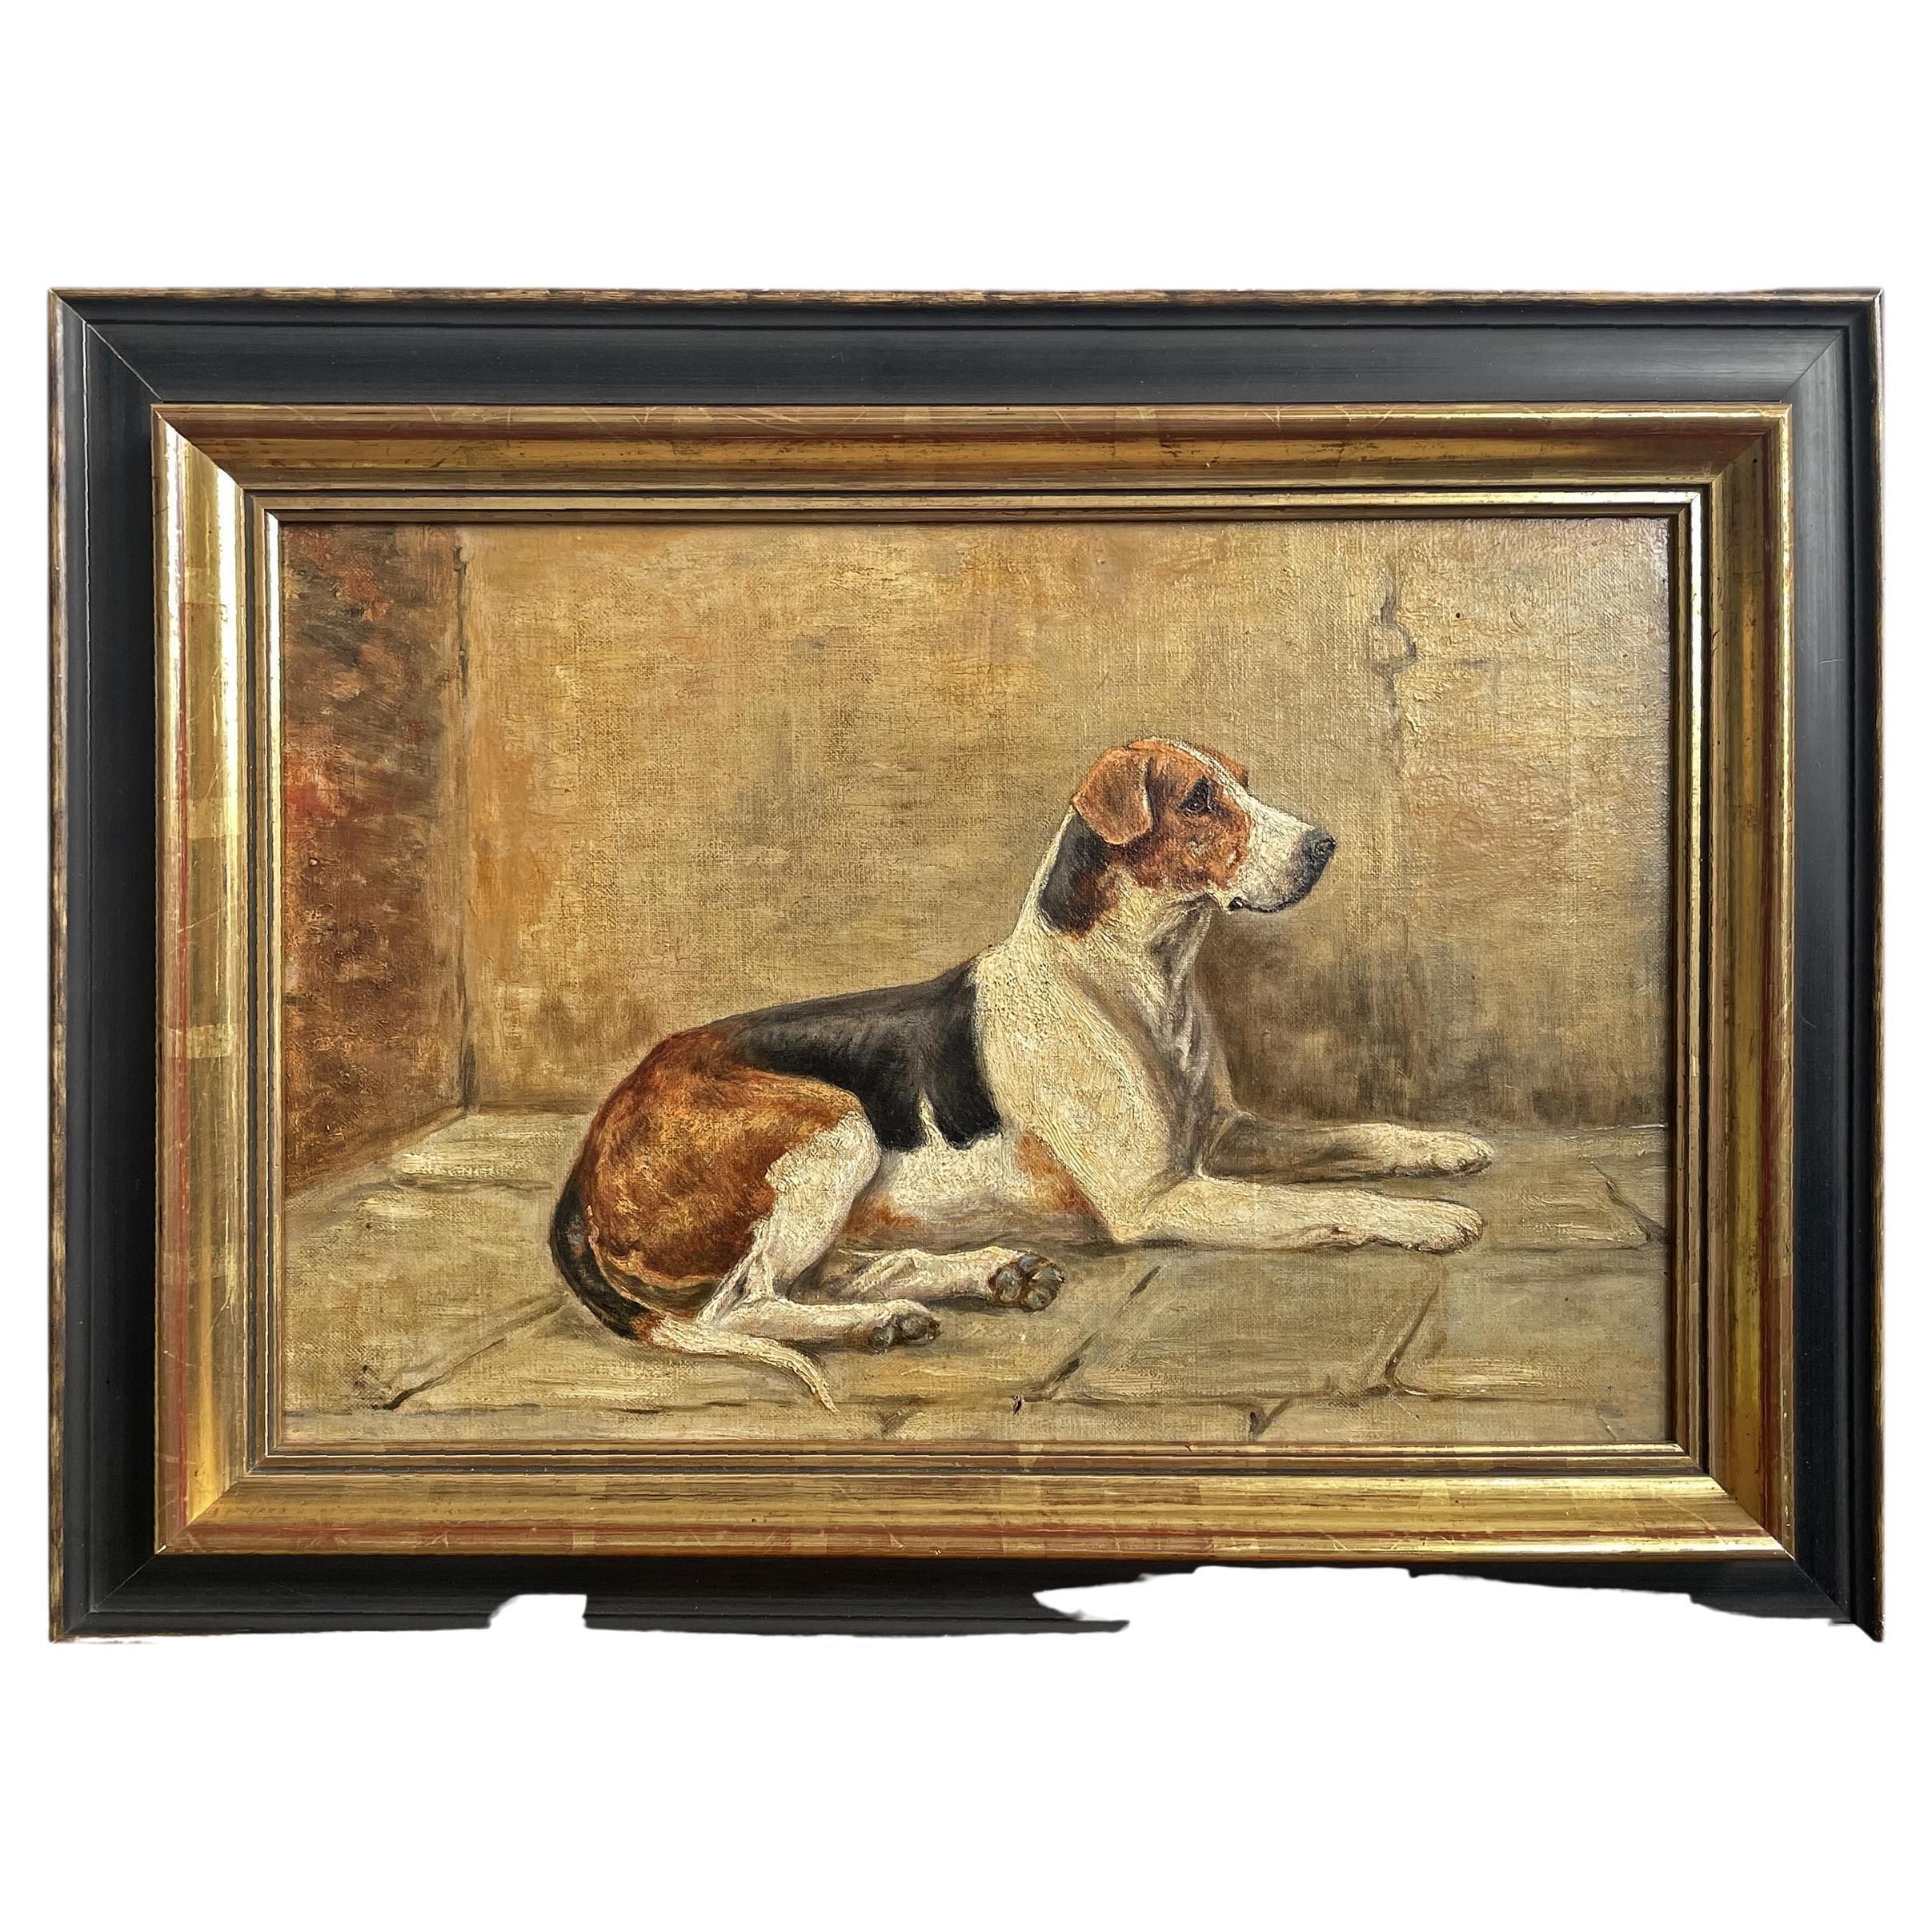 Foxhound

31 x 46 cm – without frame
44 x 60 cm – with frame
oil on canvas – late 19th century

Oil painting on canvas, English, from the late 19th century, depicting a lying Foxhound.
The physiognomy of the animal is particularly well rendered and